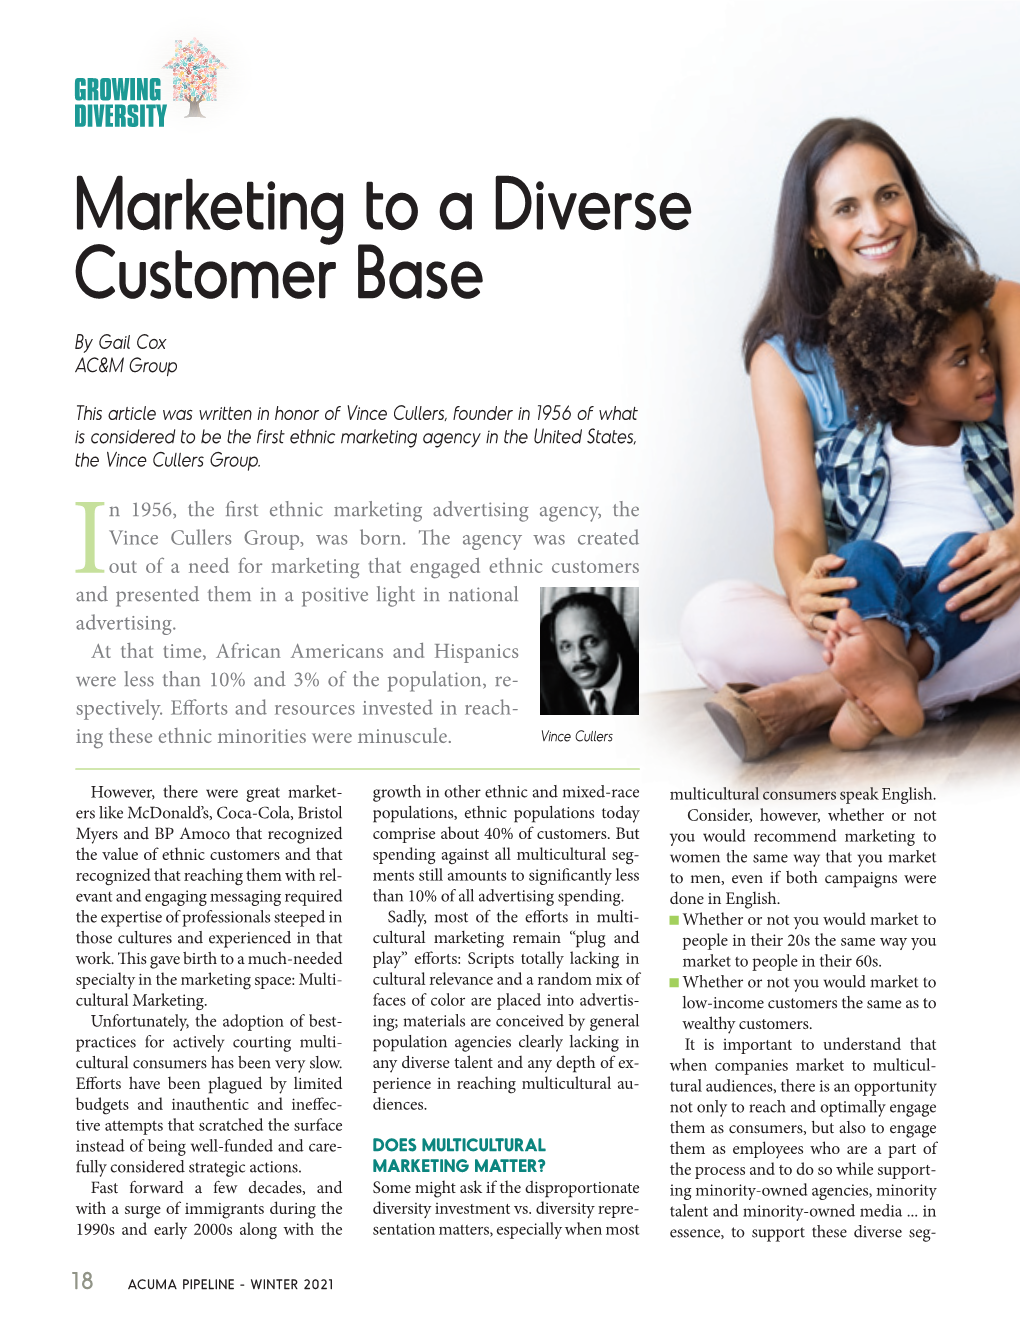 Marketing to a Diverse Customer Base by Gail Cox AC&M Group